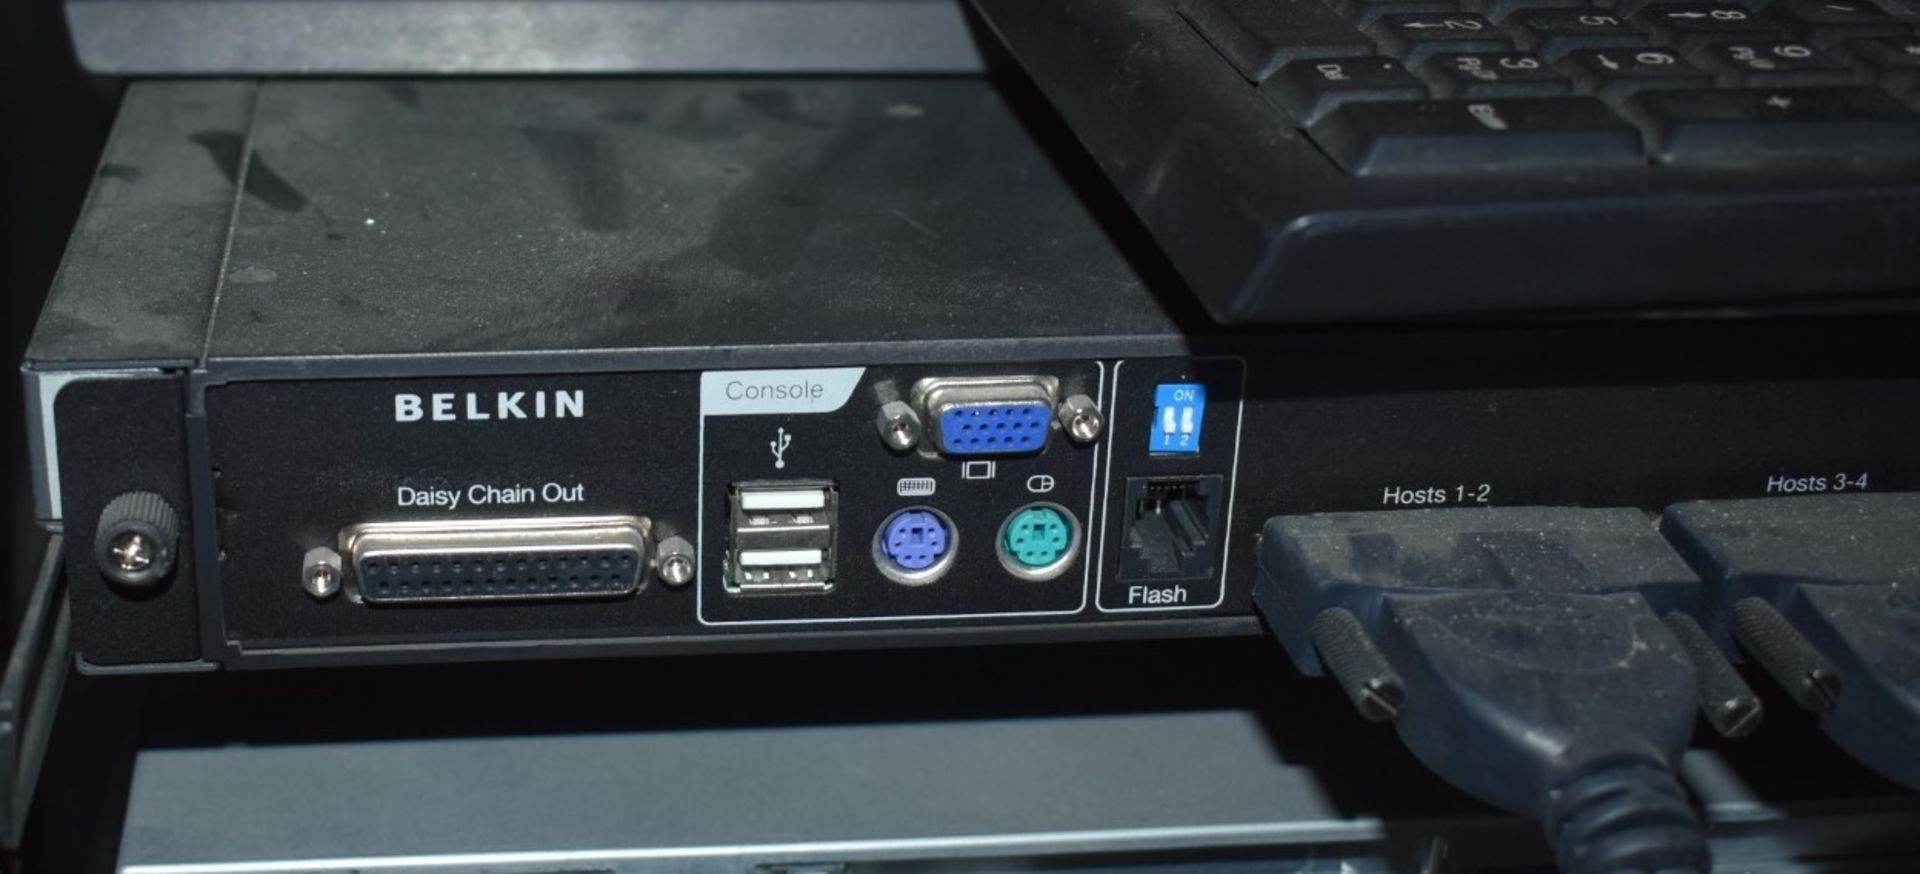 1 x Belkin Slide Out Monitor and Keyboard For Server Racks - Includes Power Supply - Image 2 of 3